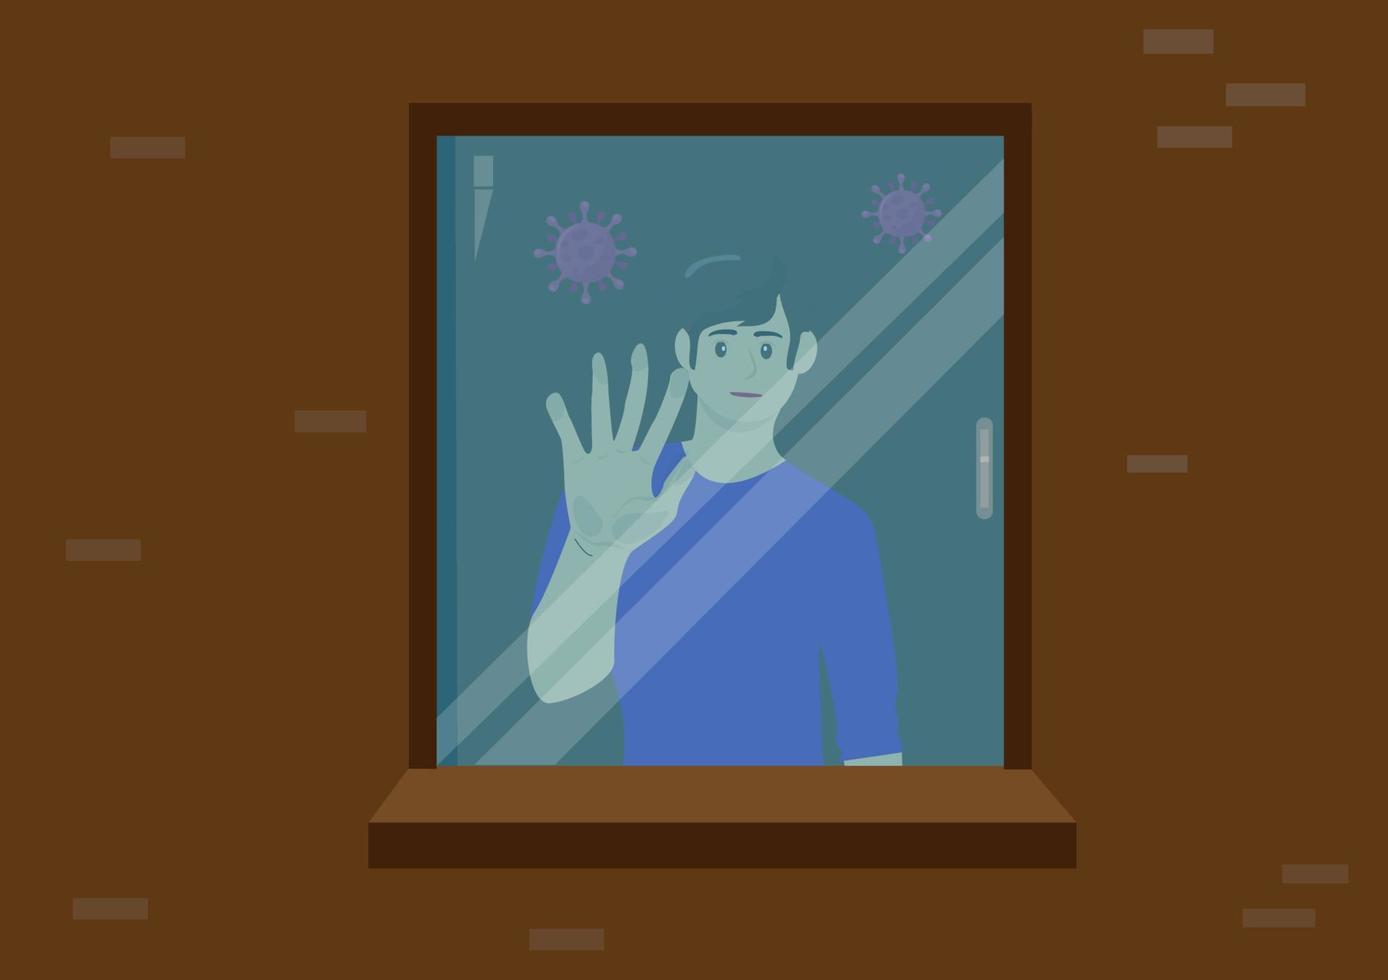 Man is quarantined after contracting coronavirus and hospital beds are full. he looks sad from the window covid-19 concept work from home health care quarantine vector cartoon image